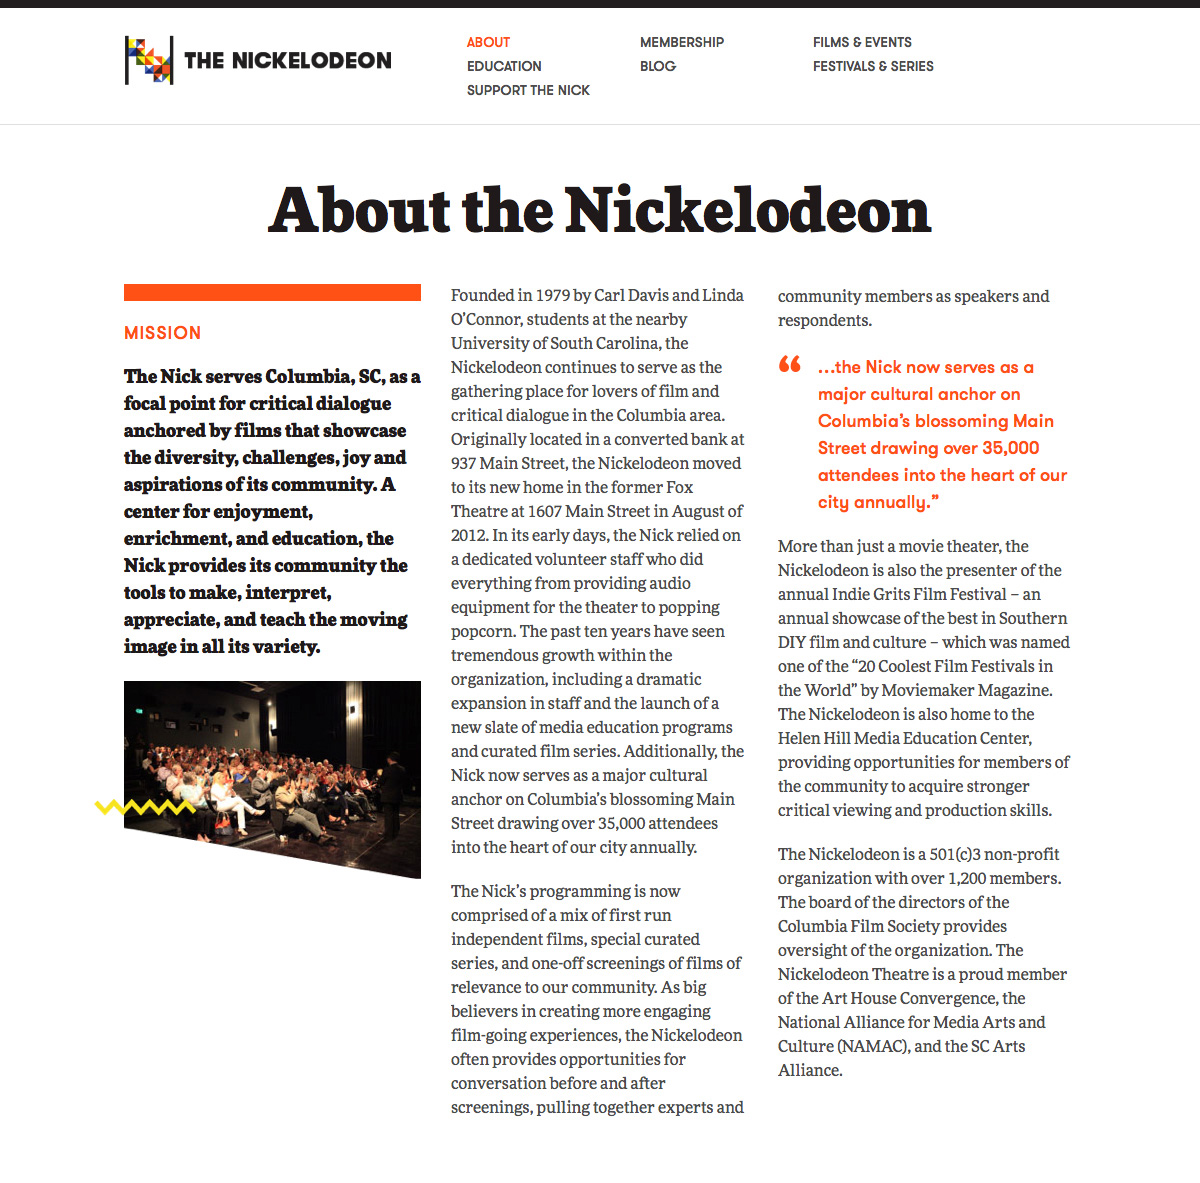 The About page of the Nickelodeon site